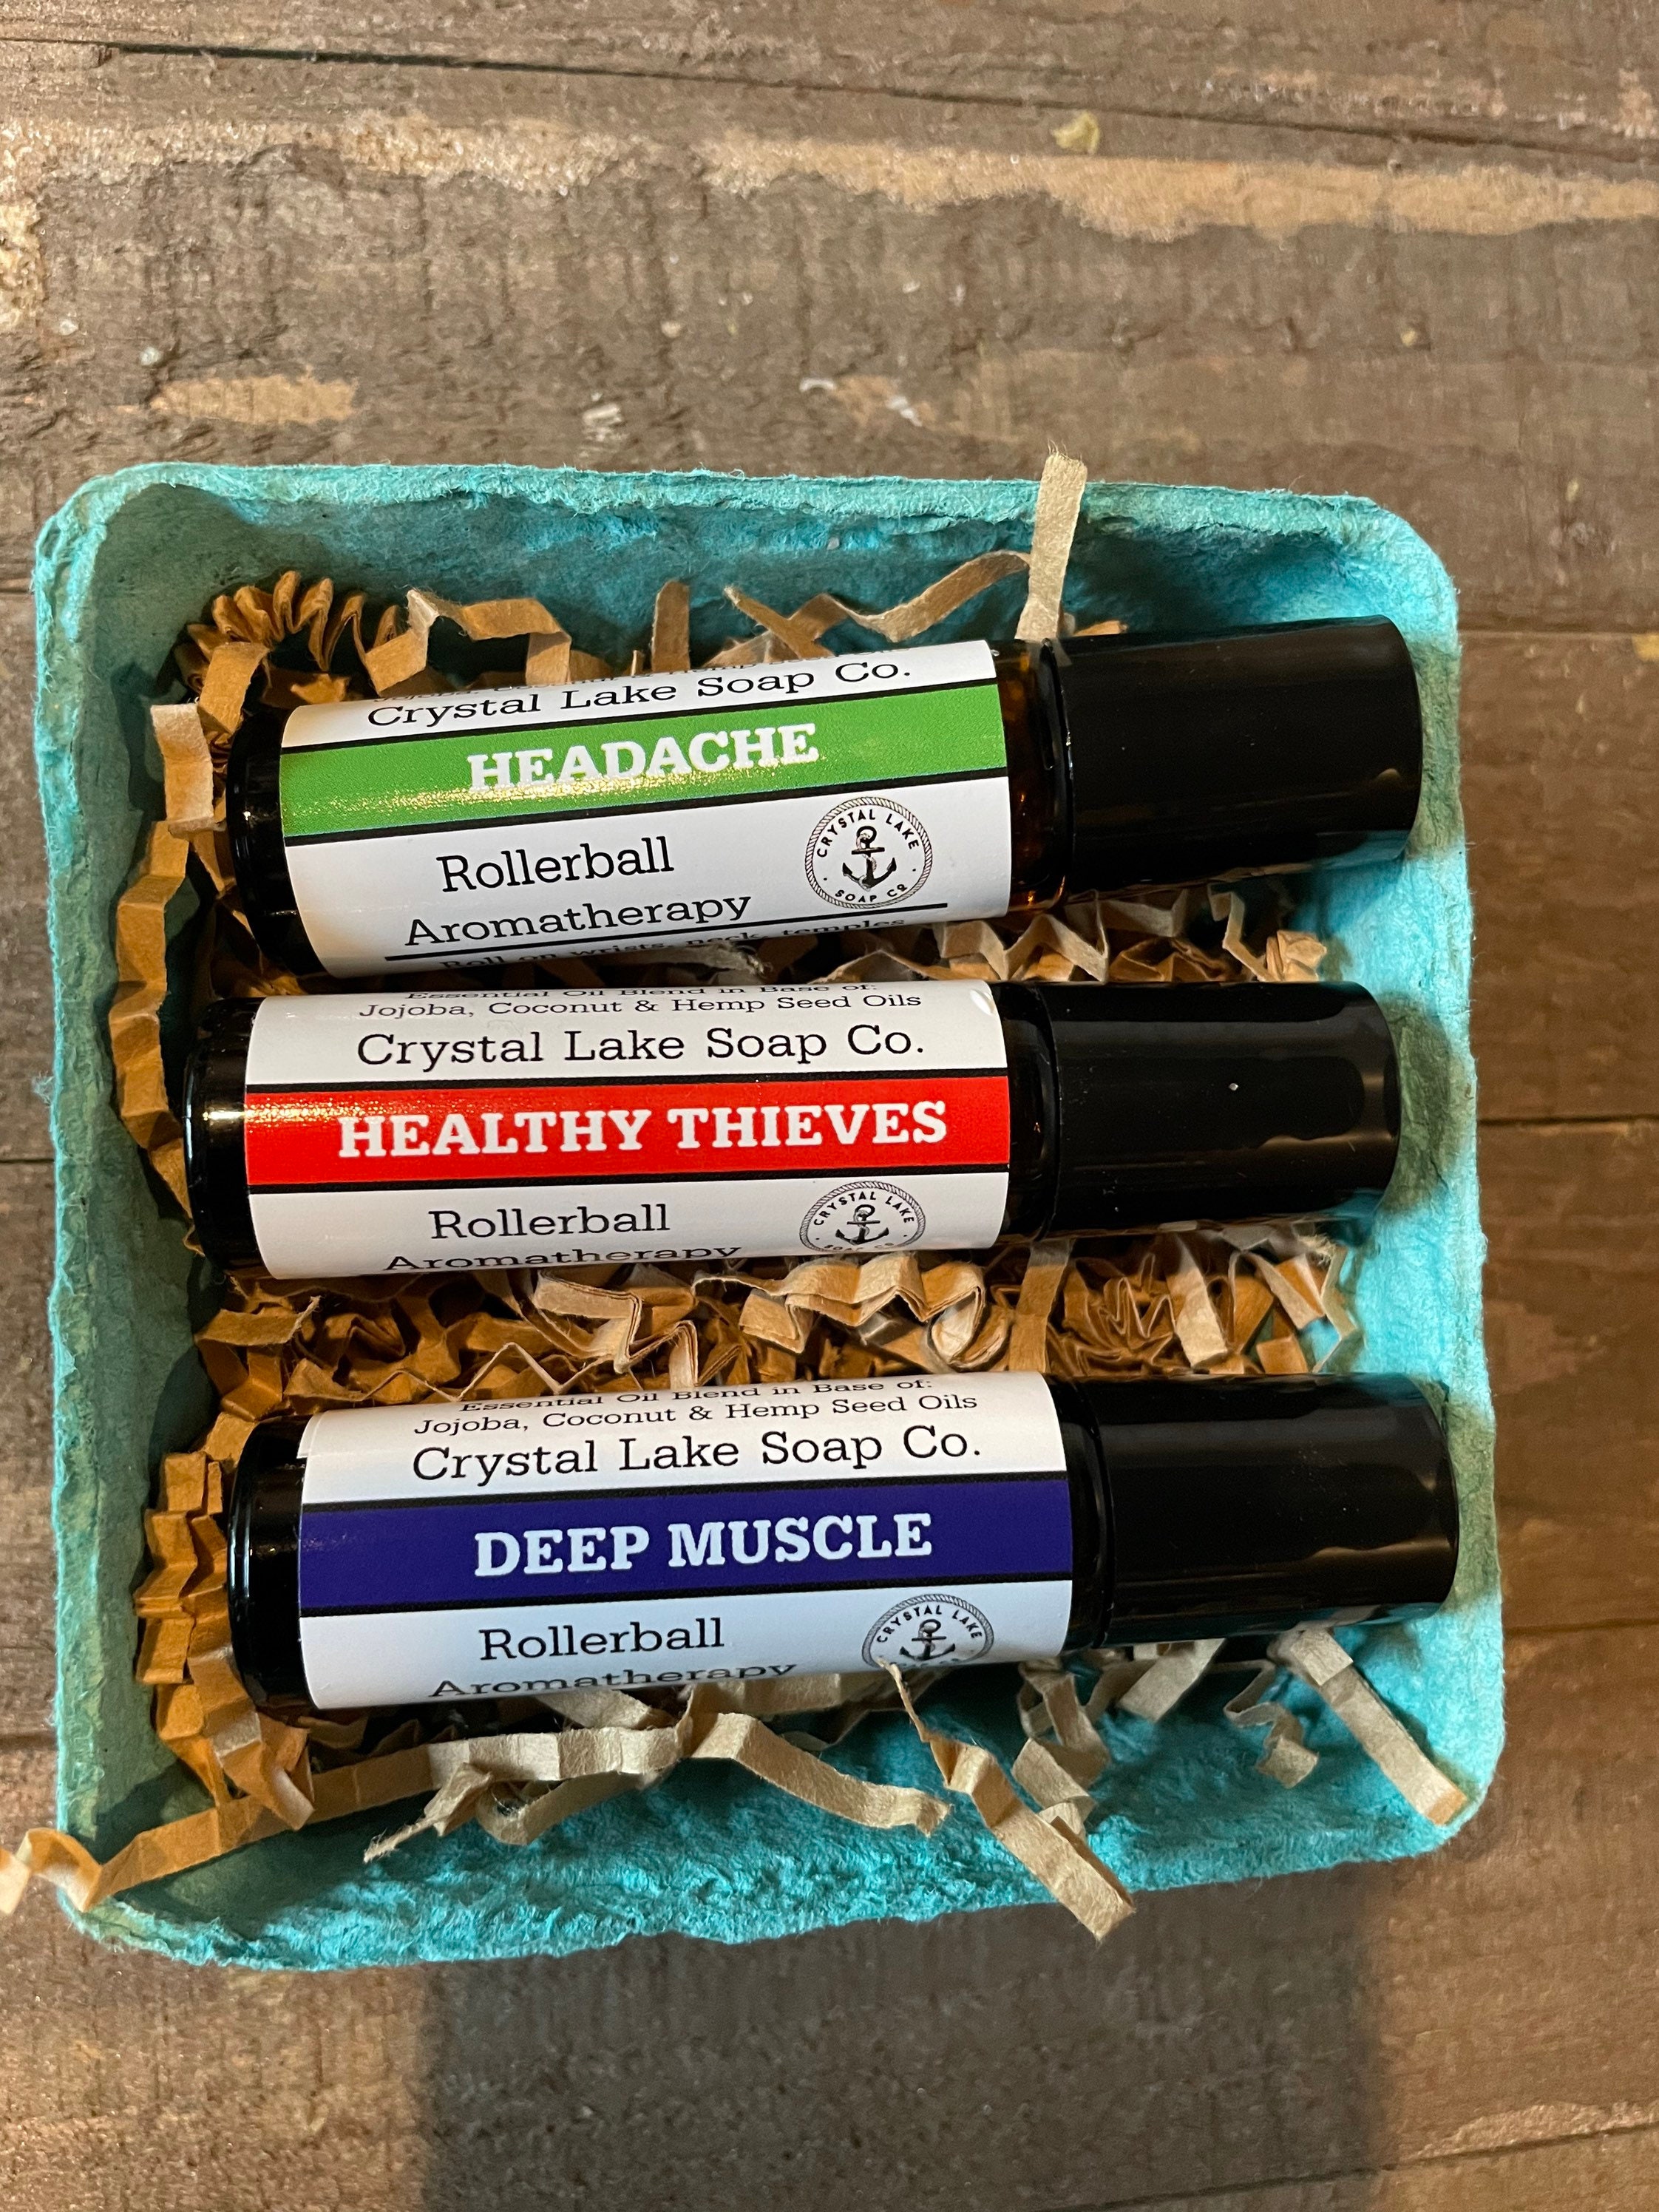 4oz Thief Immunity Essential Oil Organic Blend (Based on The Tale of Four  Thieves) Therapeutic Grade USDA Certified Blend of Clove, Cinnamon,  Rosemary, Lemon and Eucalyptus